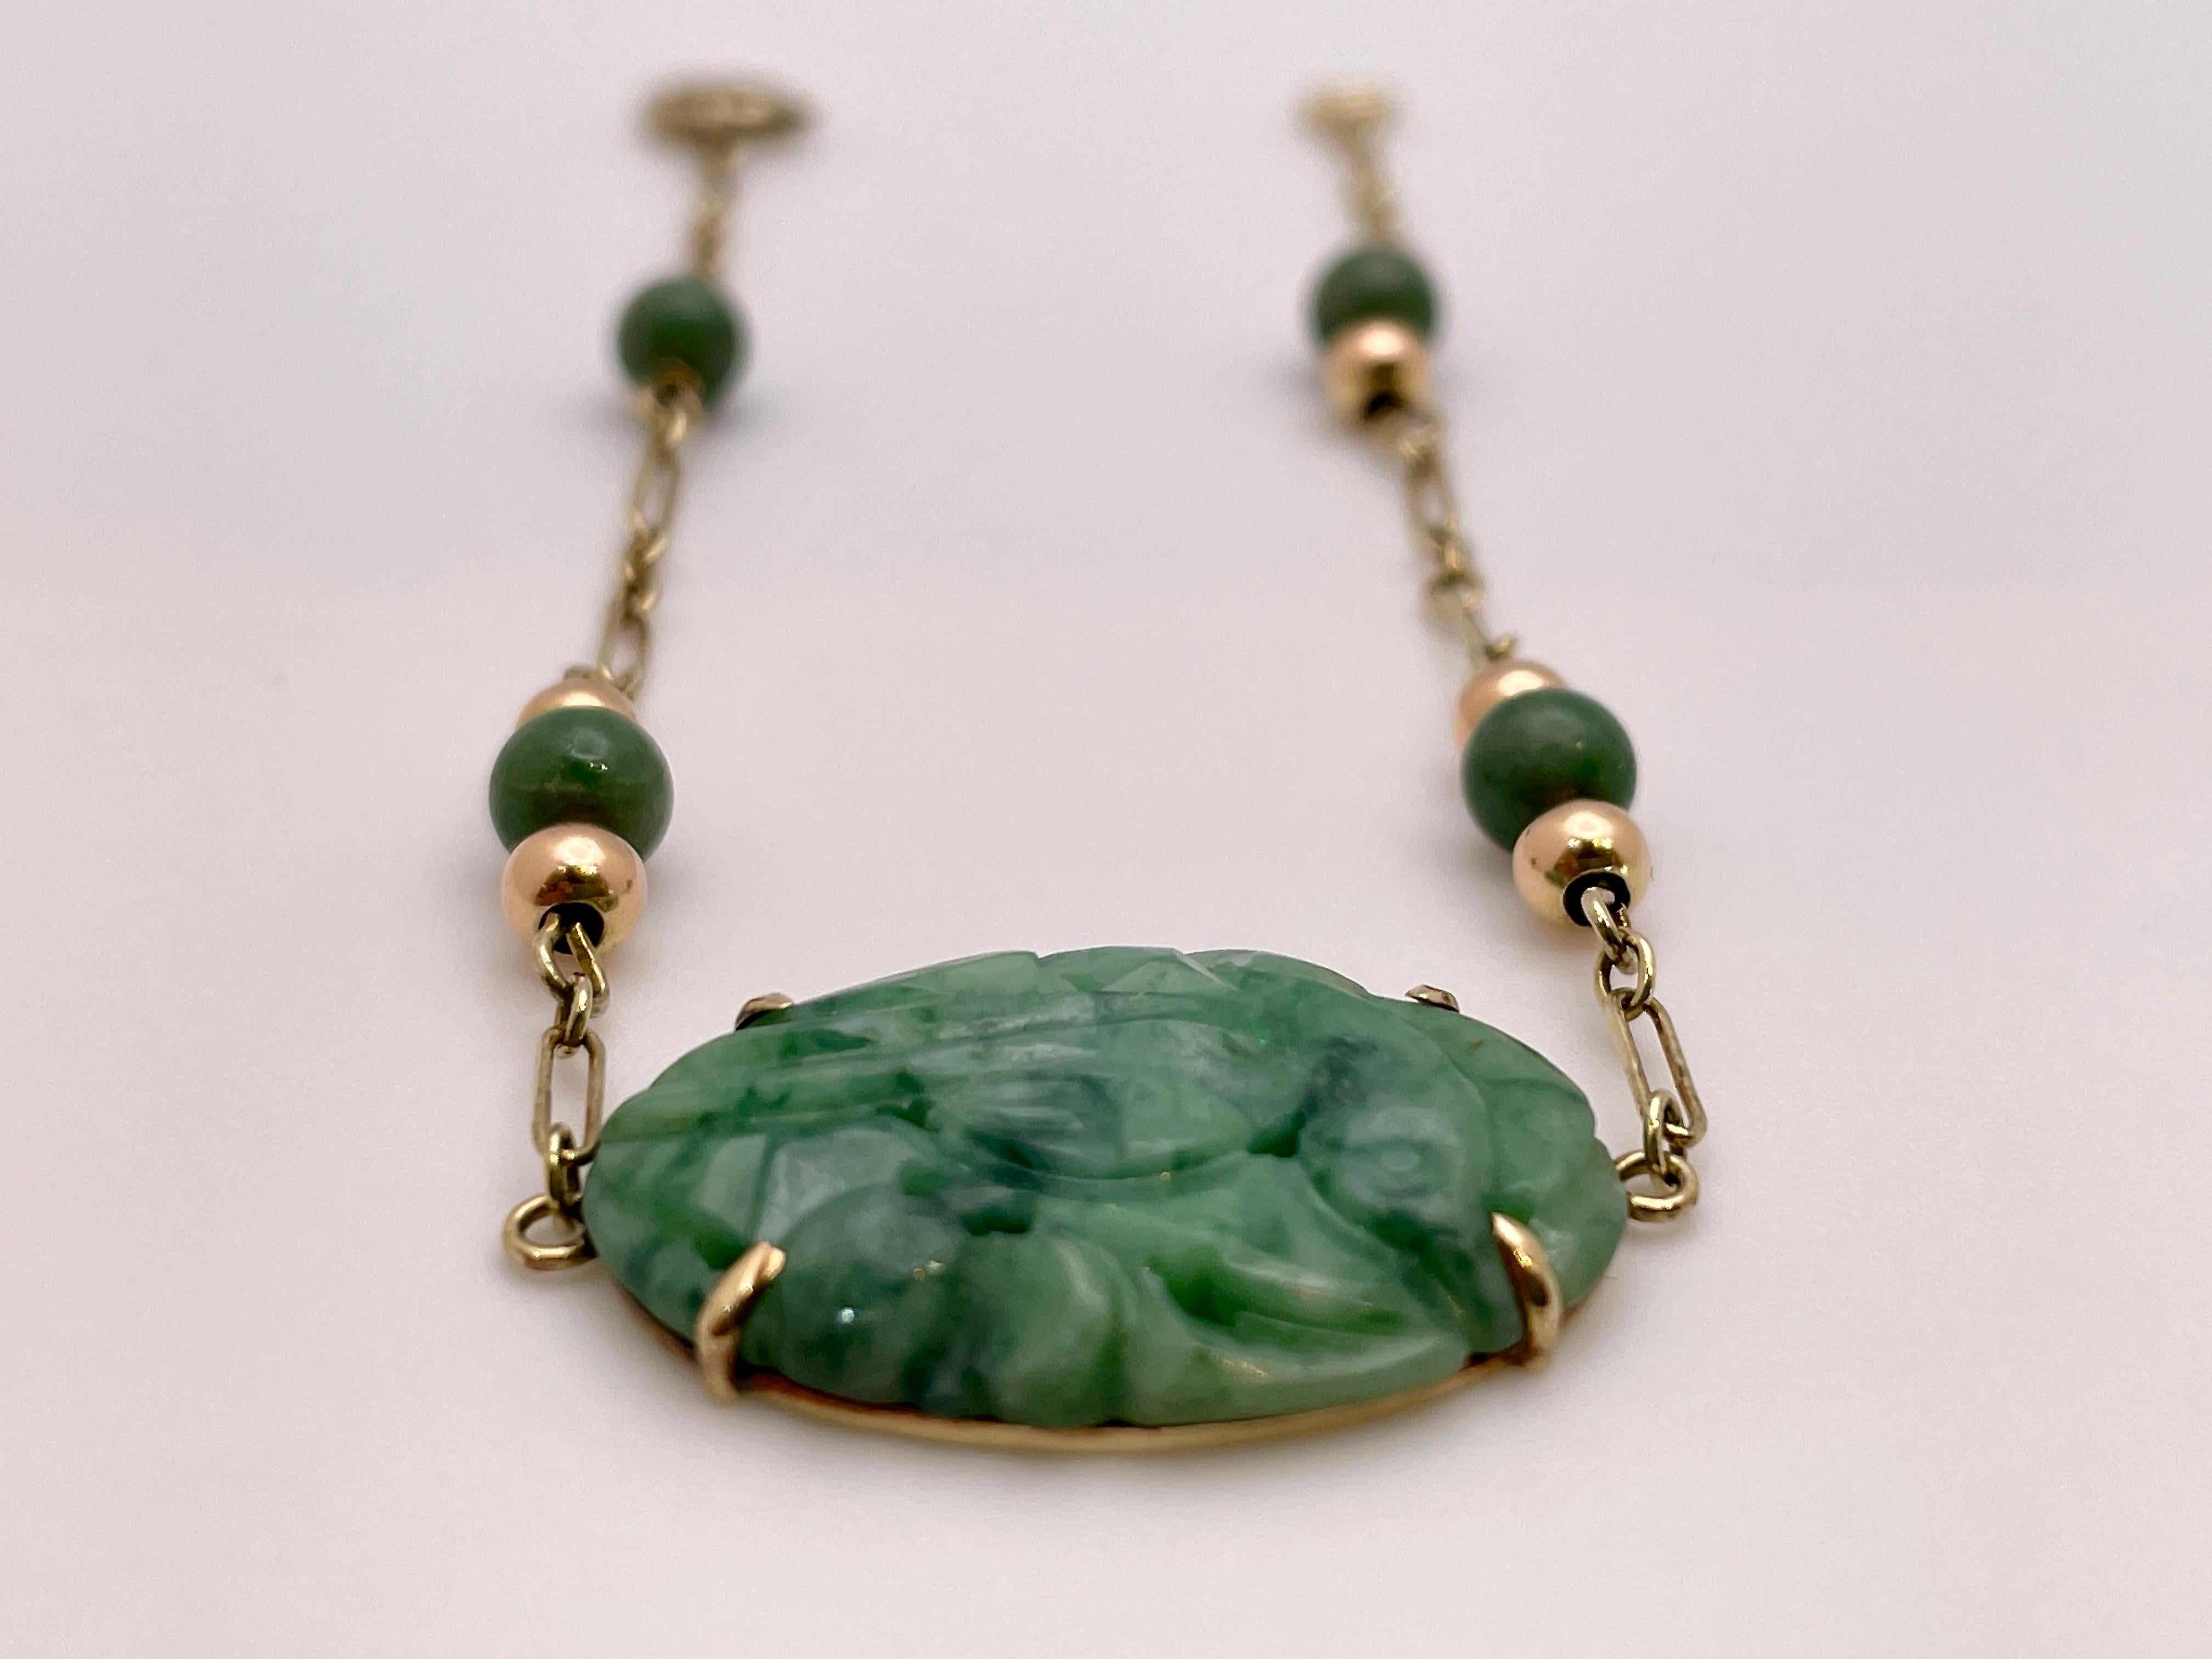 An original Victorian 14K yellow gold certified natural jade bracelet. Centered with one oval carved and pierced cabochon cut natural jade omphacite, measuring approximately 23.00 x 15.50 x 2.75 MM, weighing approximately 9.00 CT, and colored green